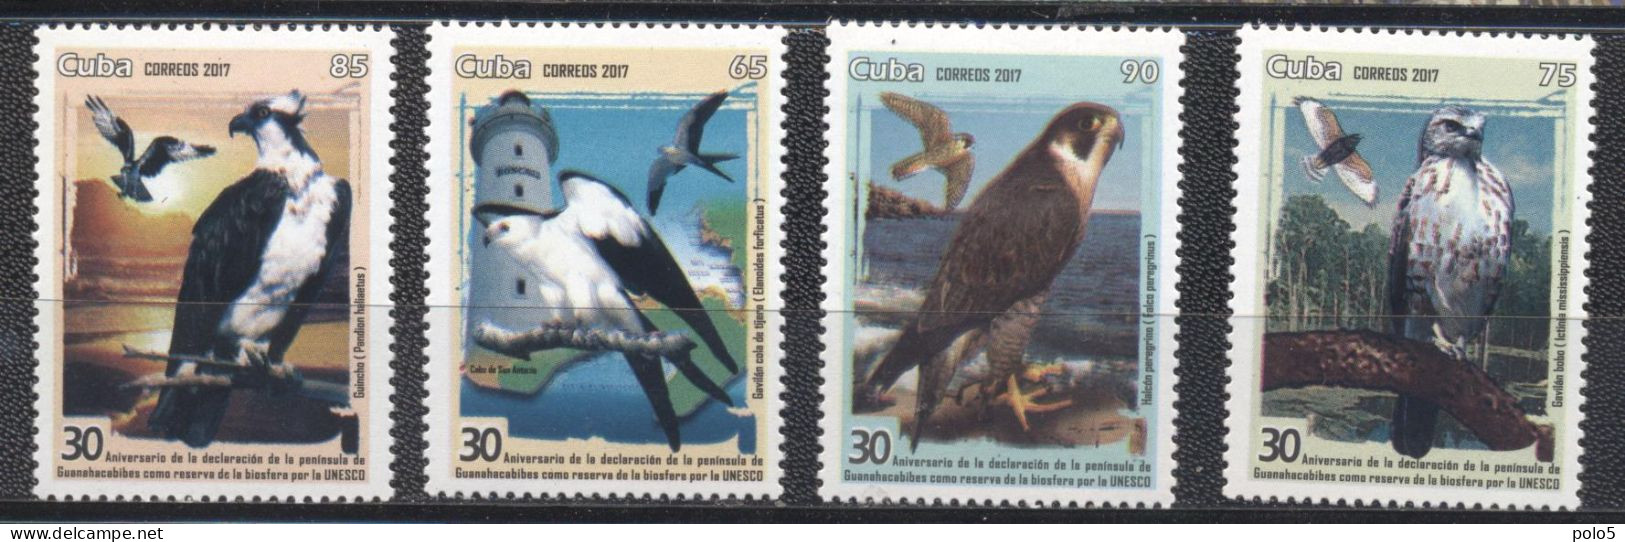 Cuba 2017-Birds-The 30th Anniversary Of The Guanacahabibes Pininsula Biosphere Reserve Set (4v) - Unused Stamps